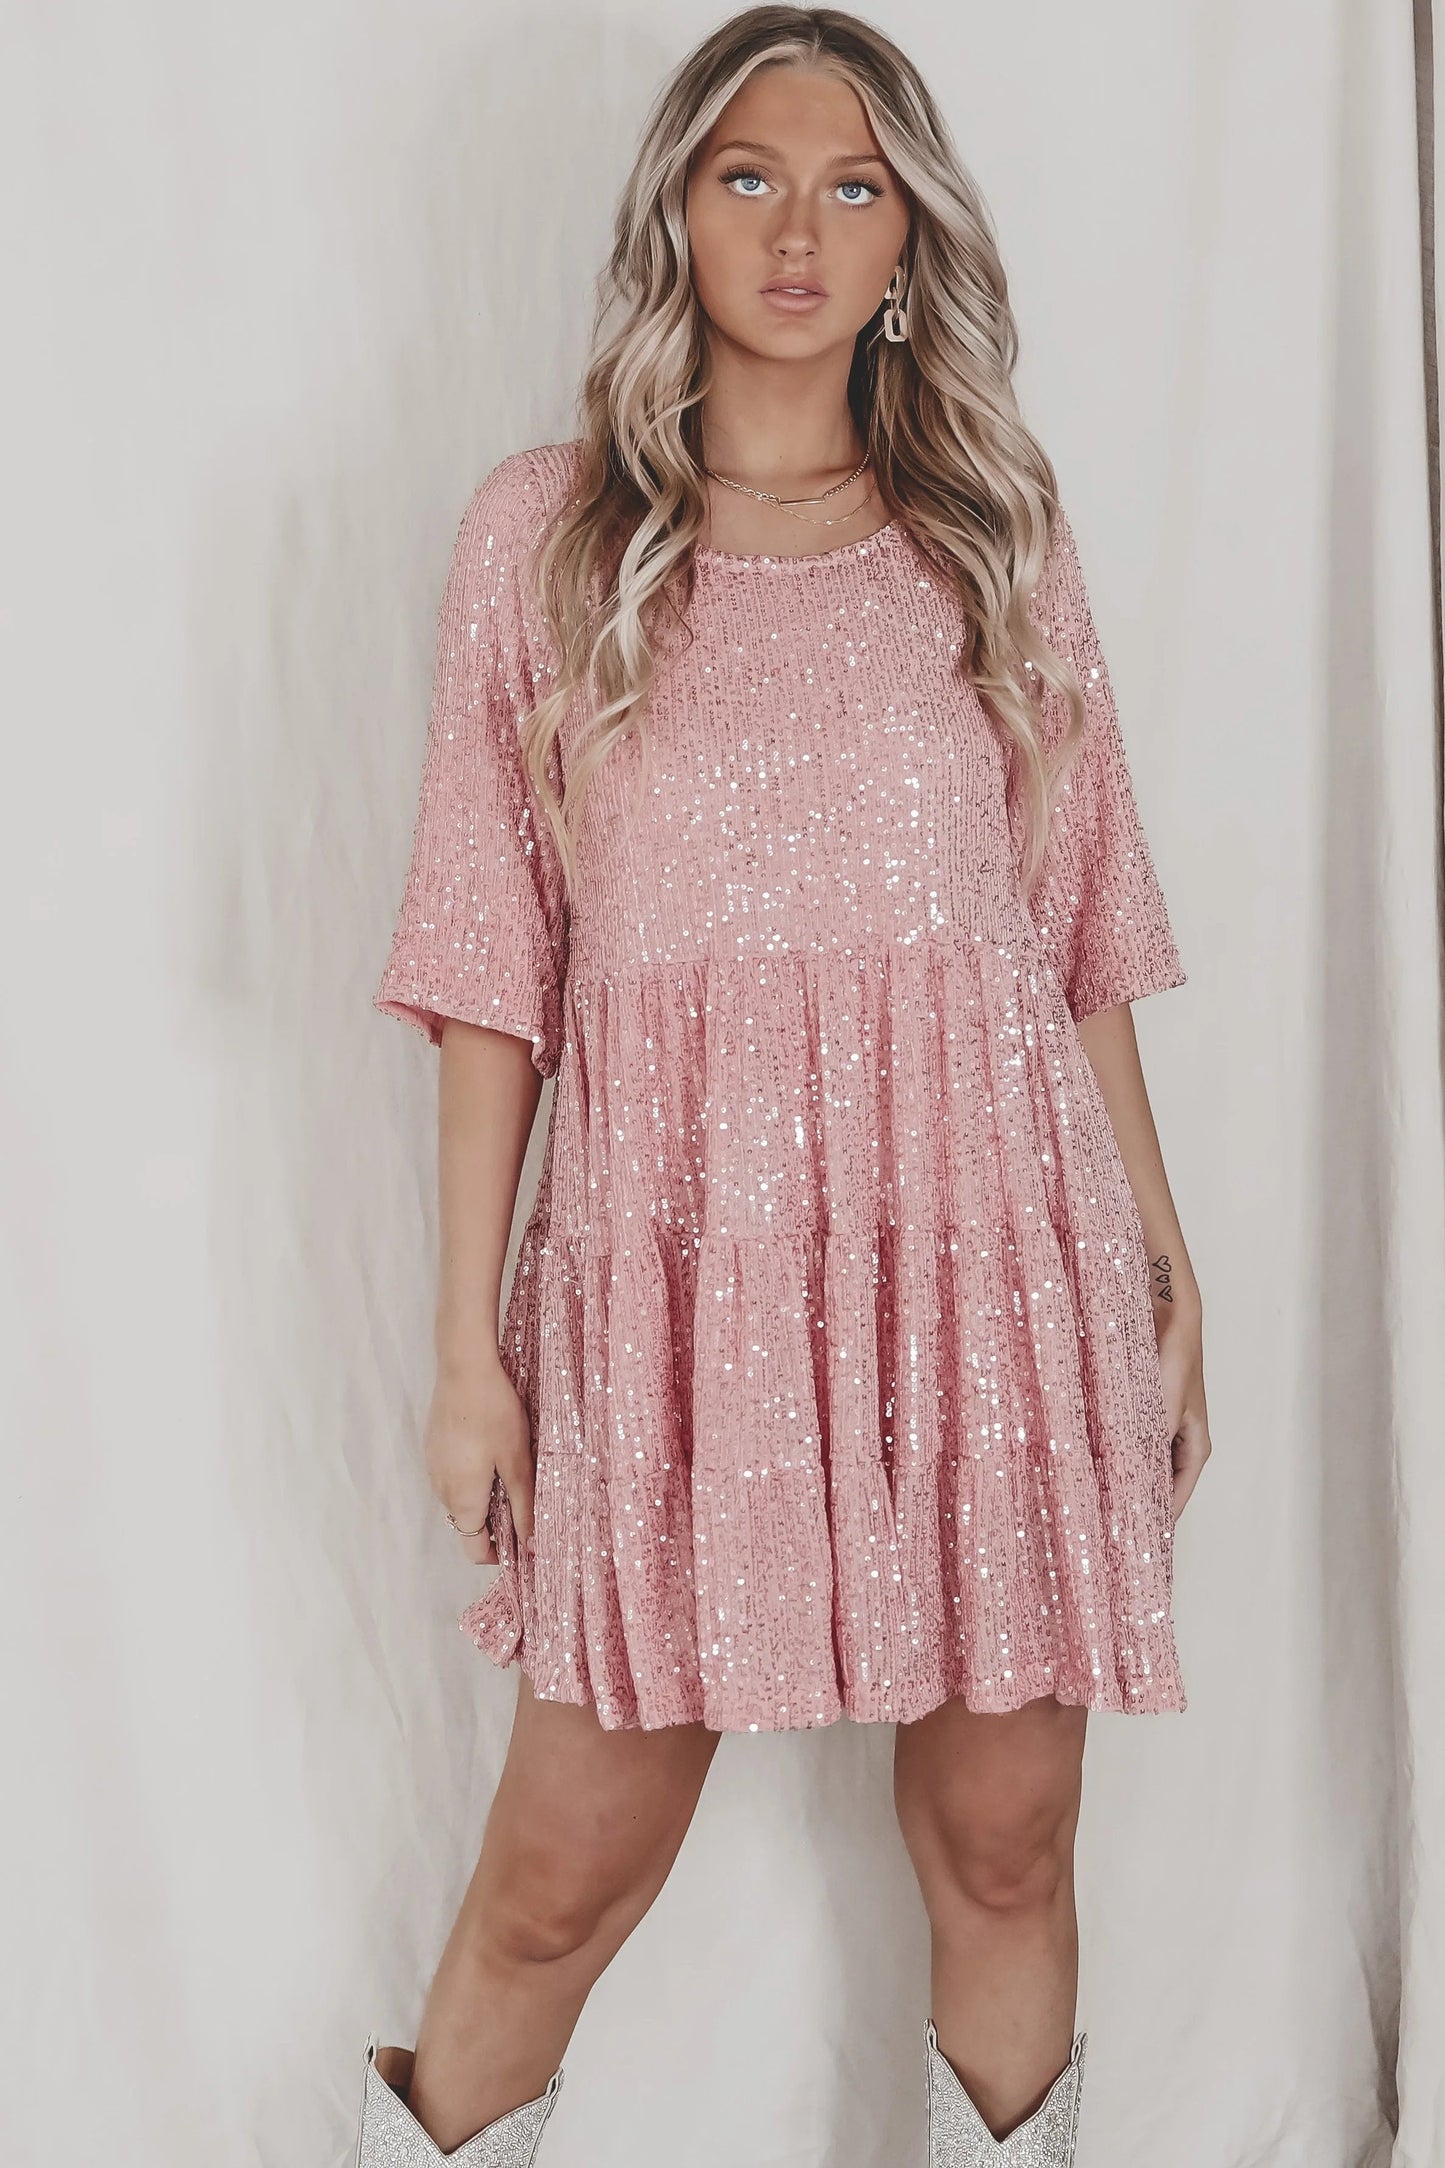 🔥LAST DAY 48% OFF🎁✨Sequin Baby Doll Dress